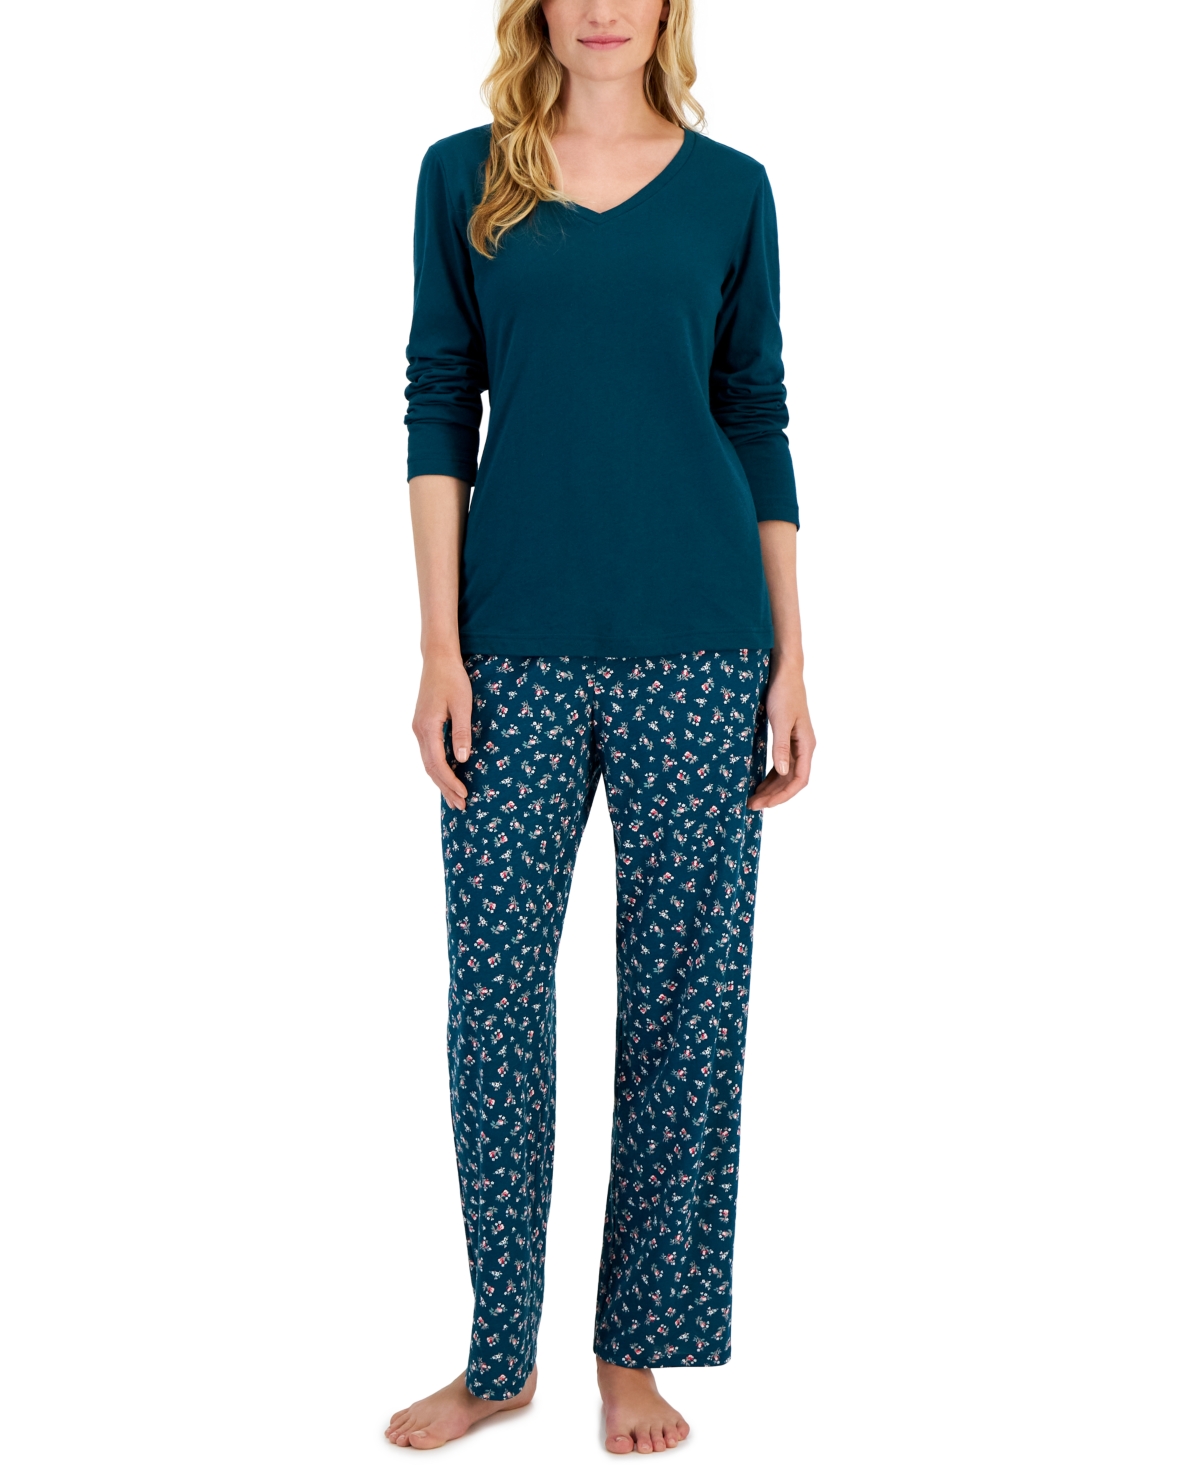 CHARTER CLUB WOMEN'S 2-PC. COTTON V-NECK PACKAGED PAJAMA SET, CREATED FOR MACY'S